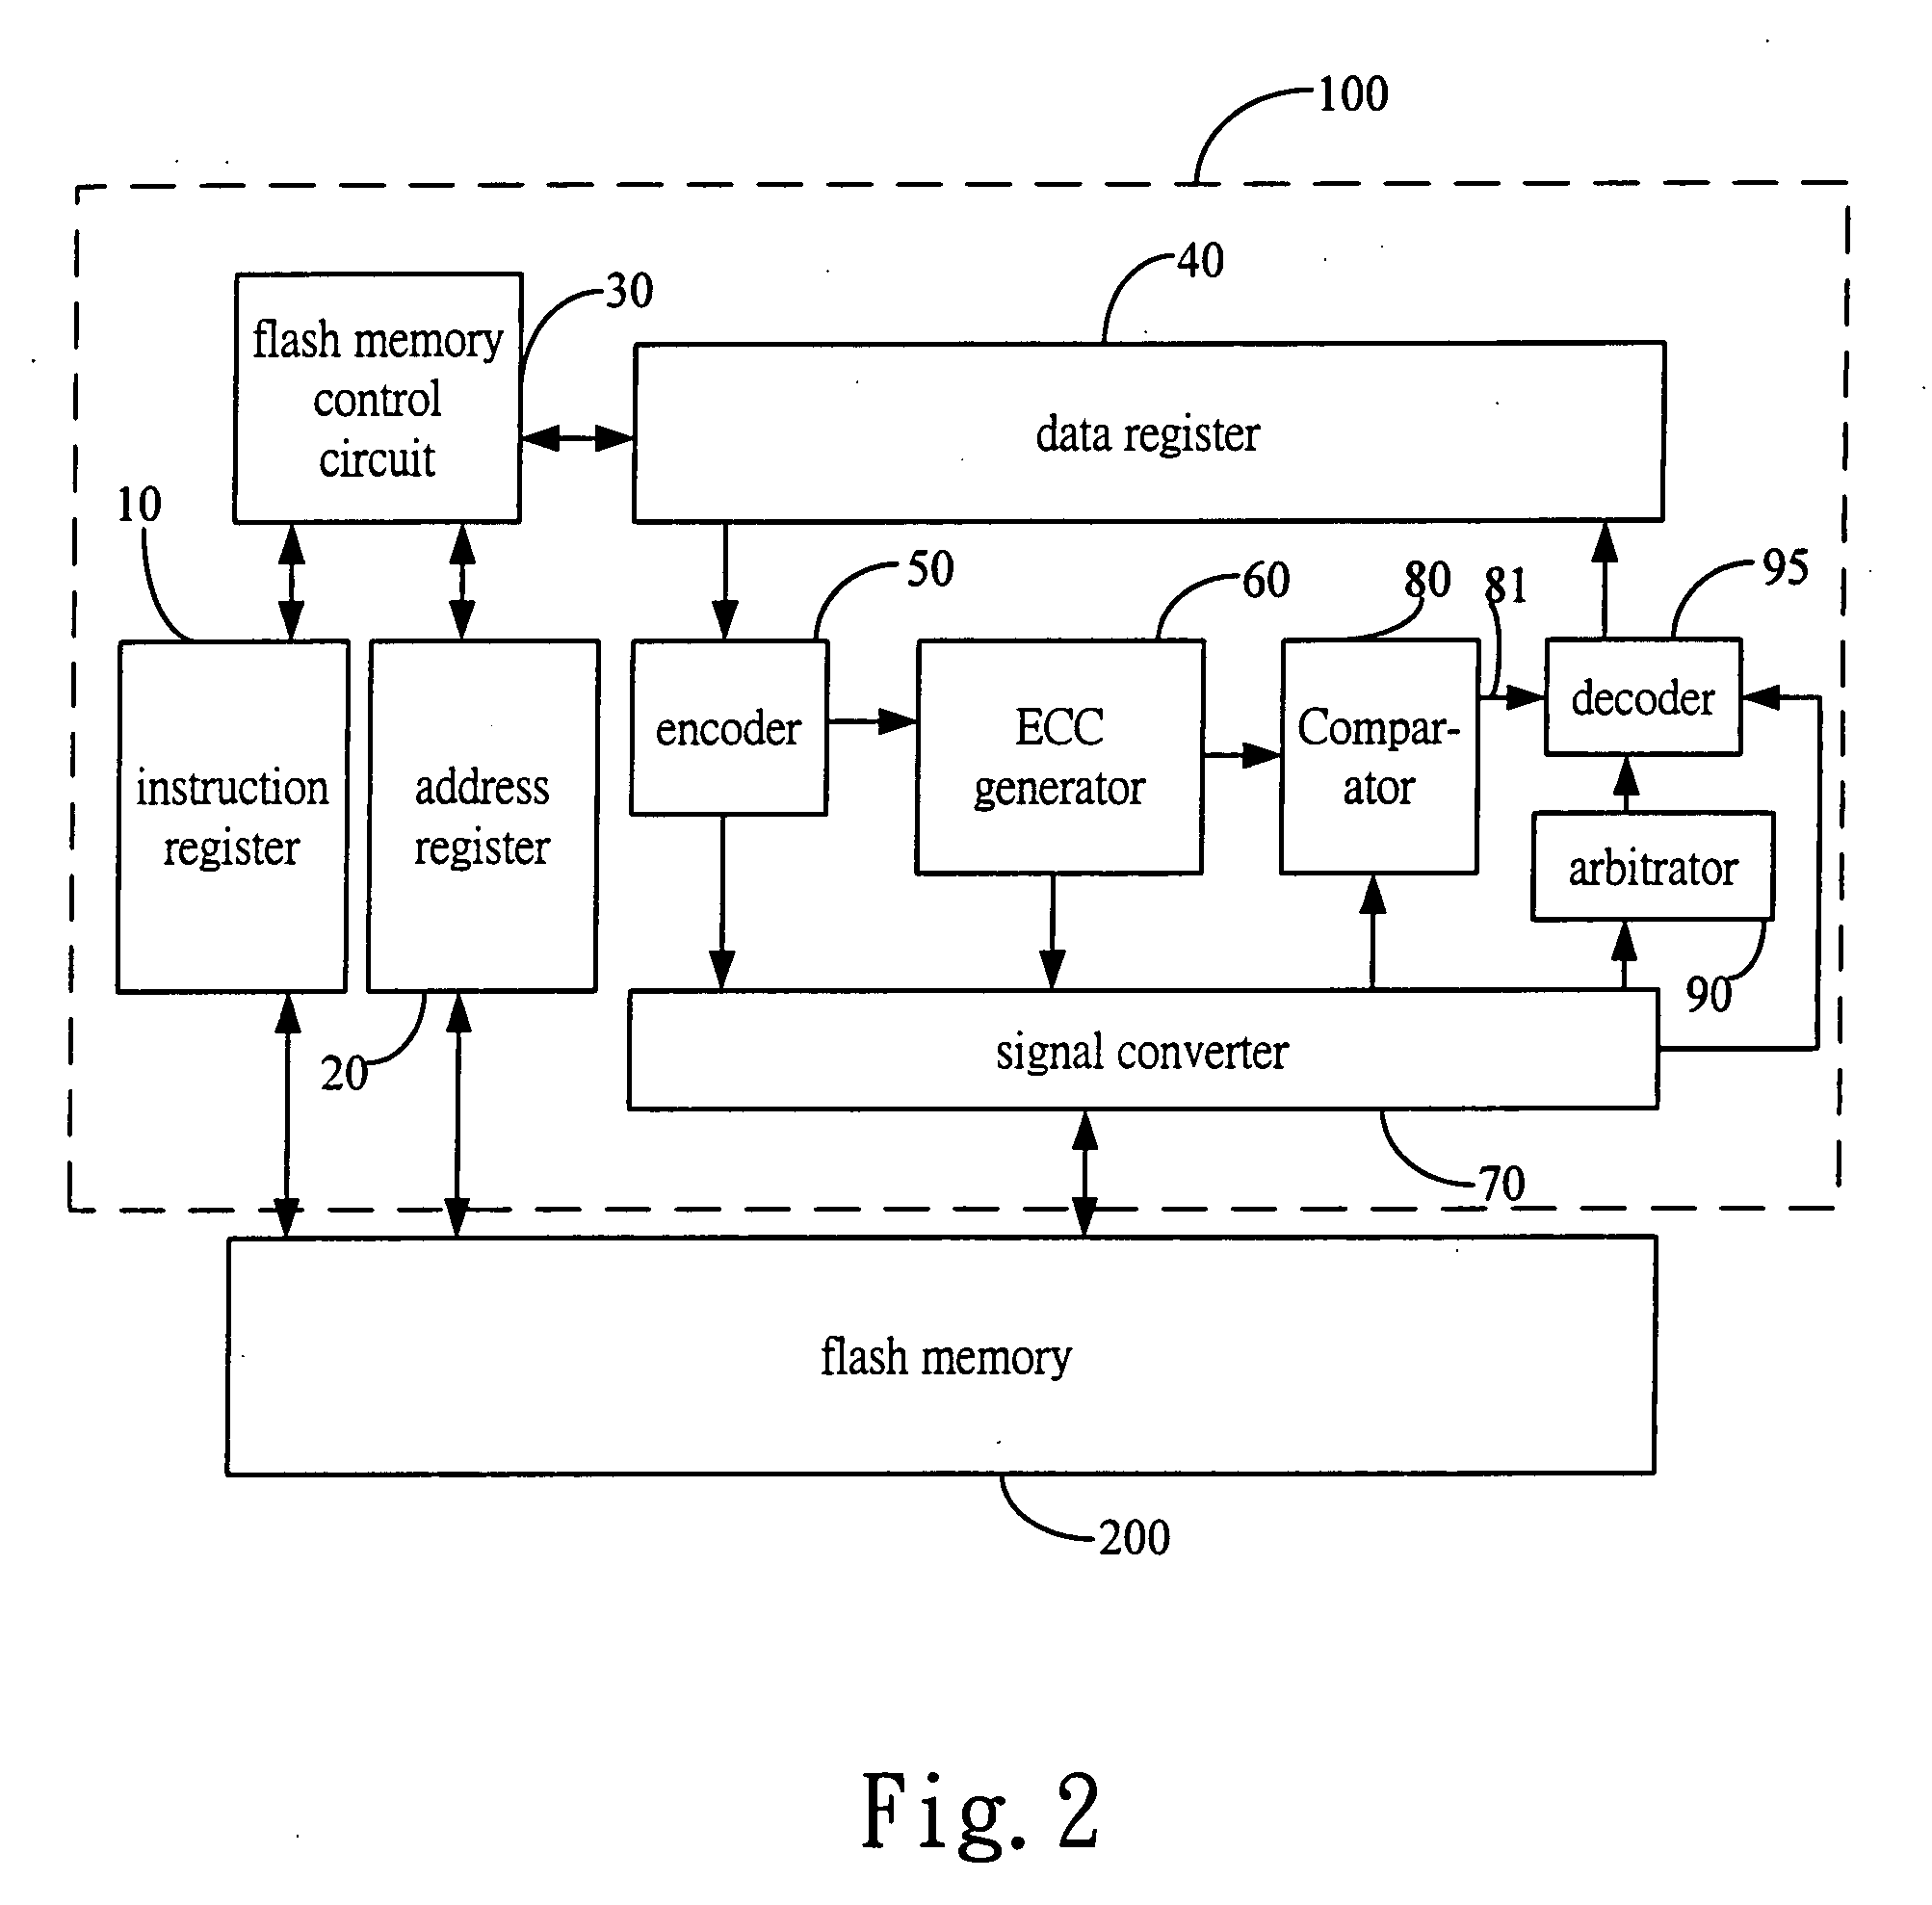 Apparatus for improving data access reliability of flash memory